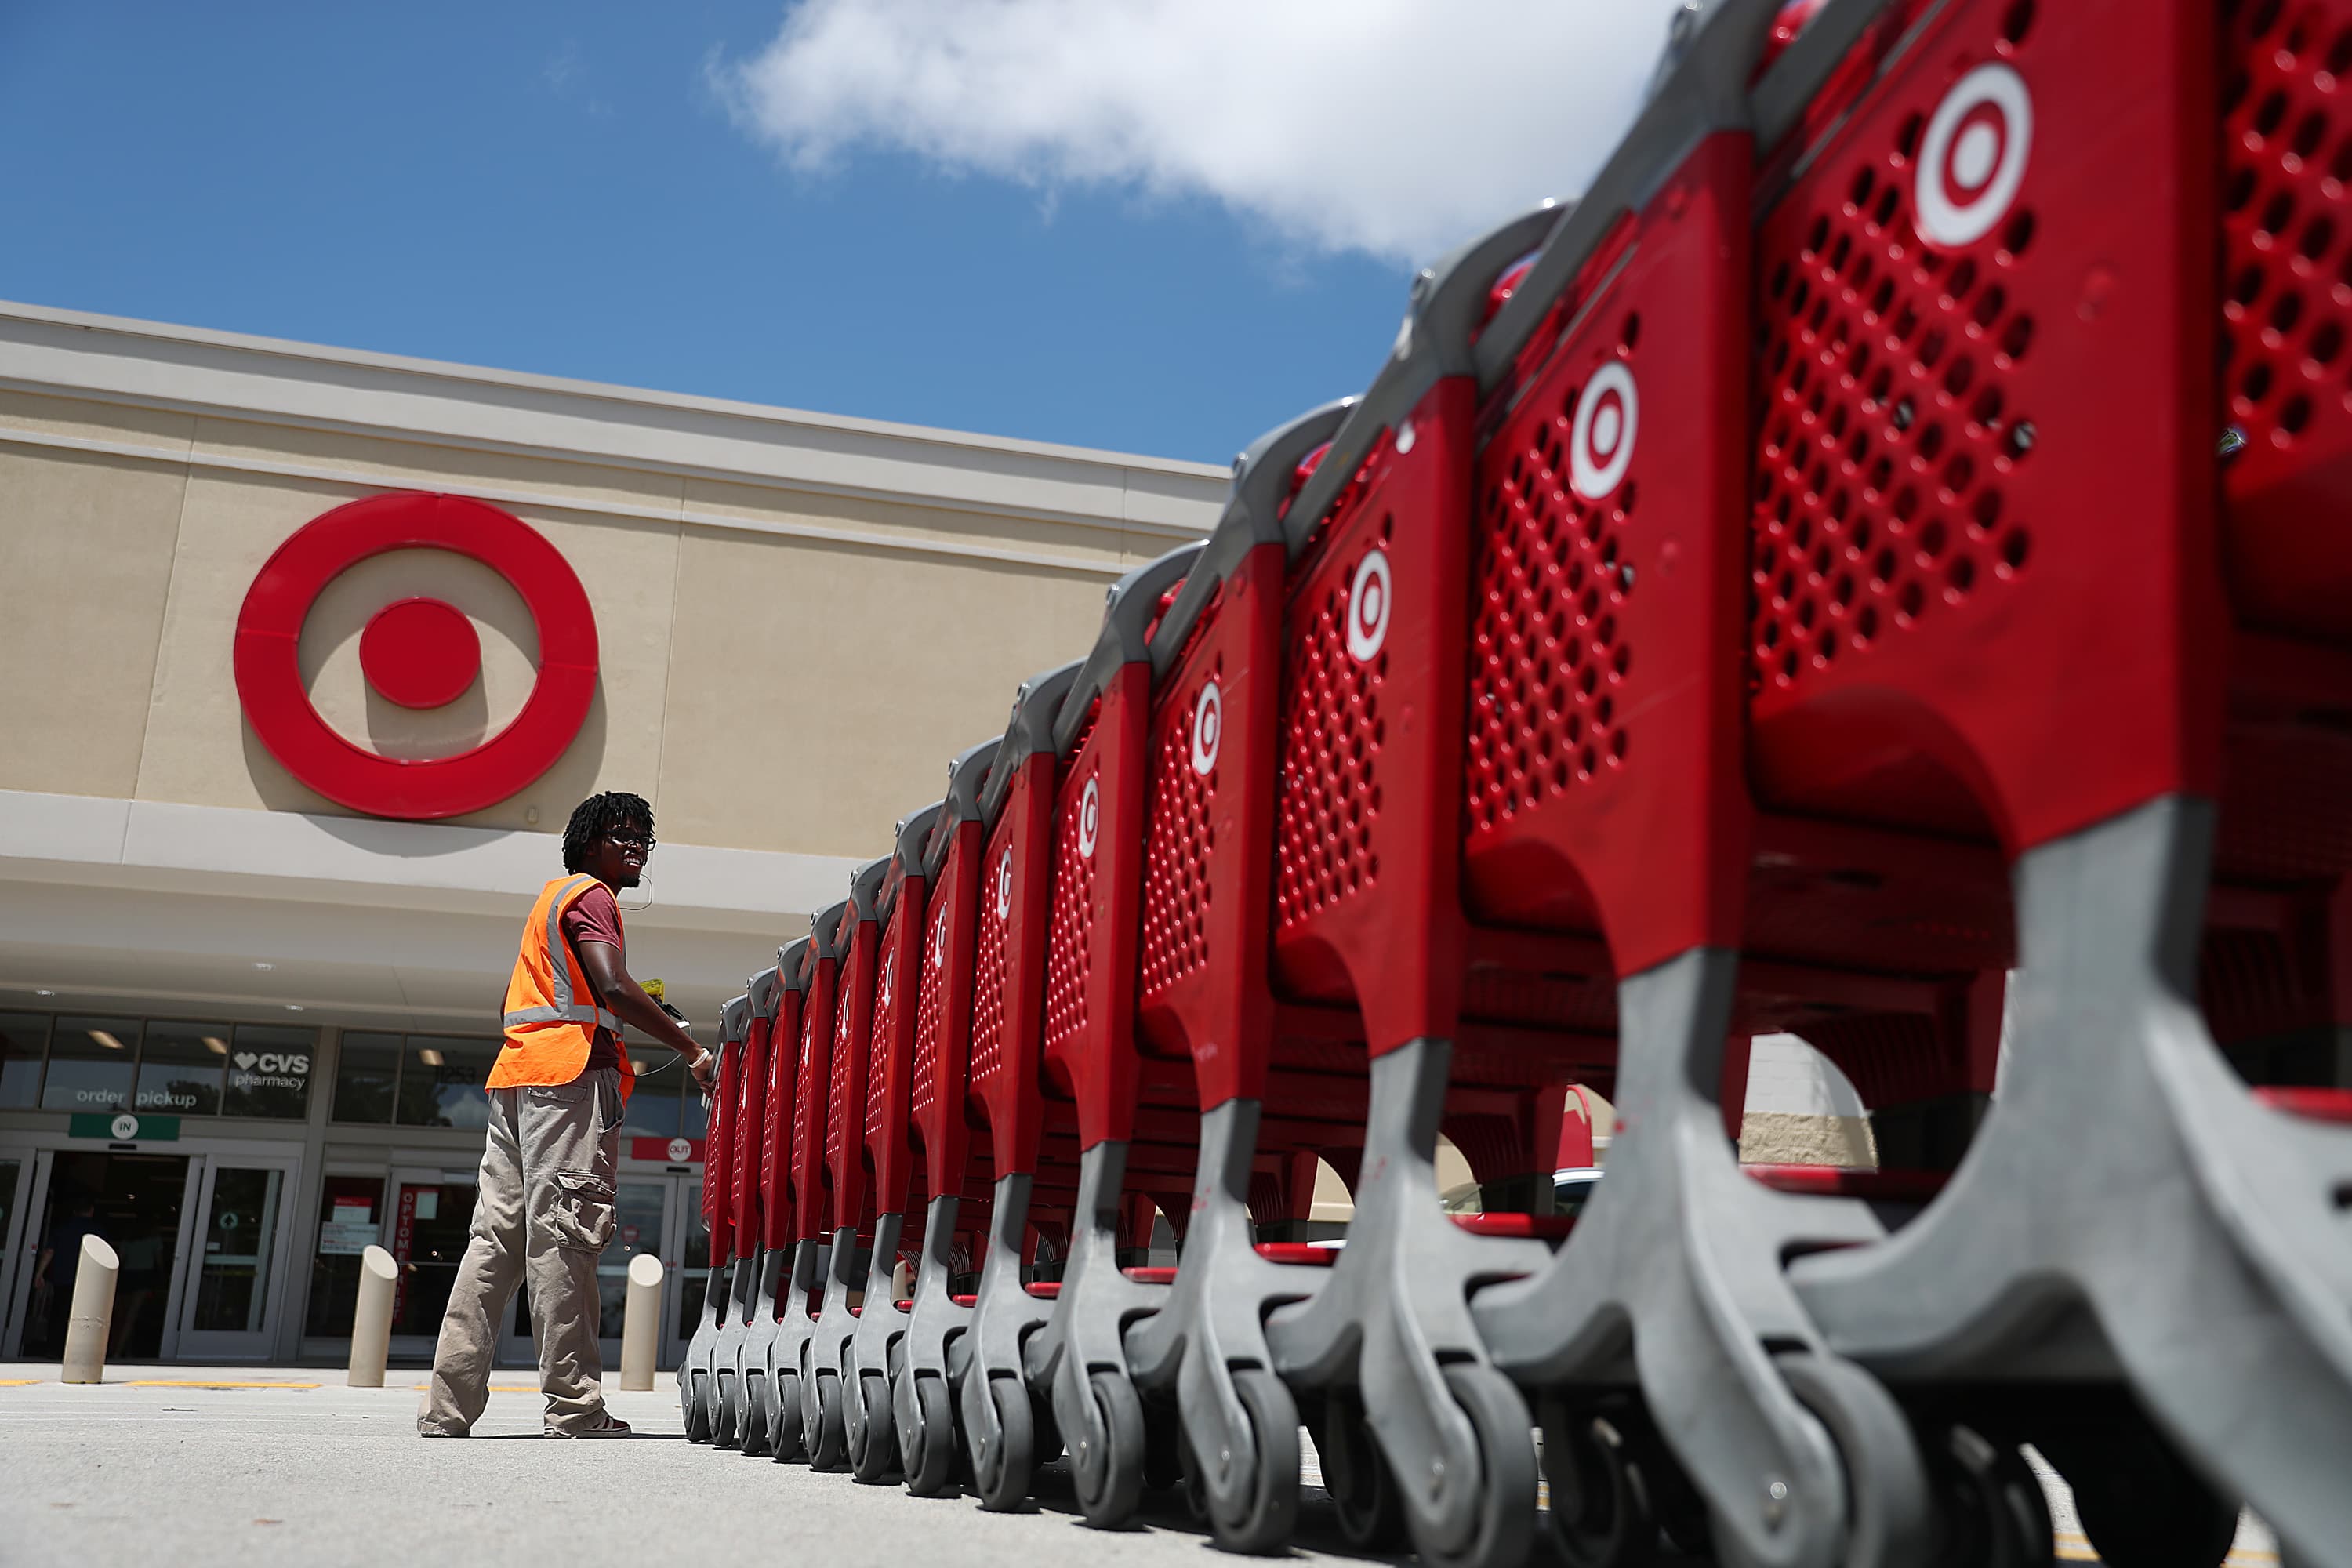 Target Raises Minimum Wage To 15 An Hour Months Before Its Deadline